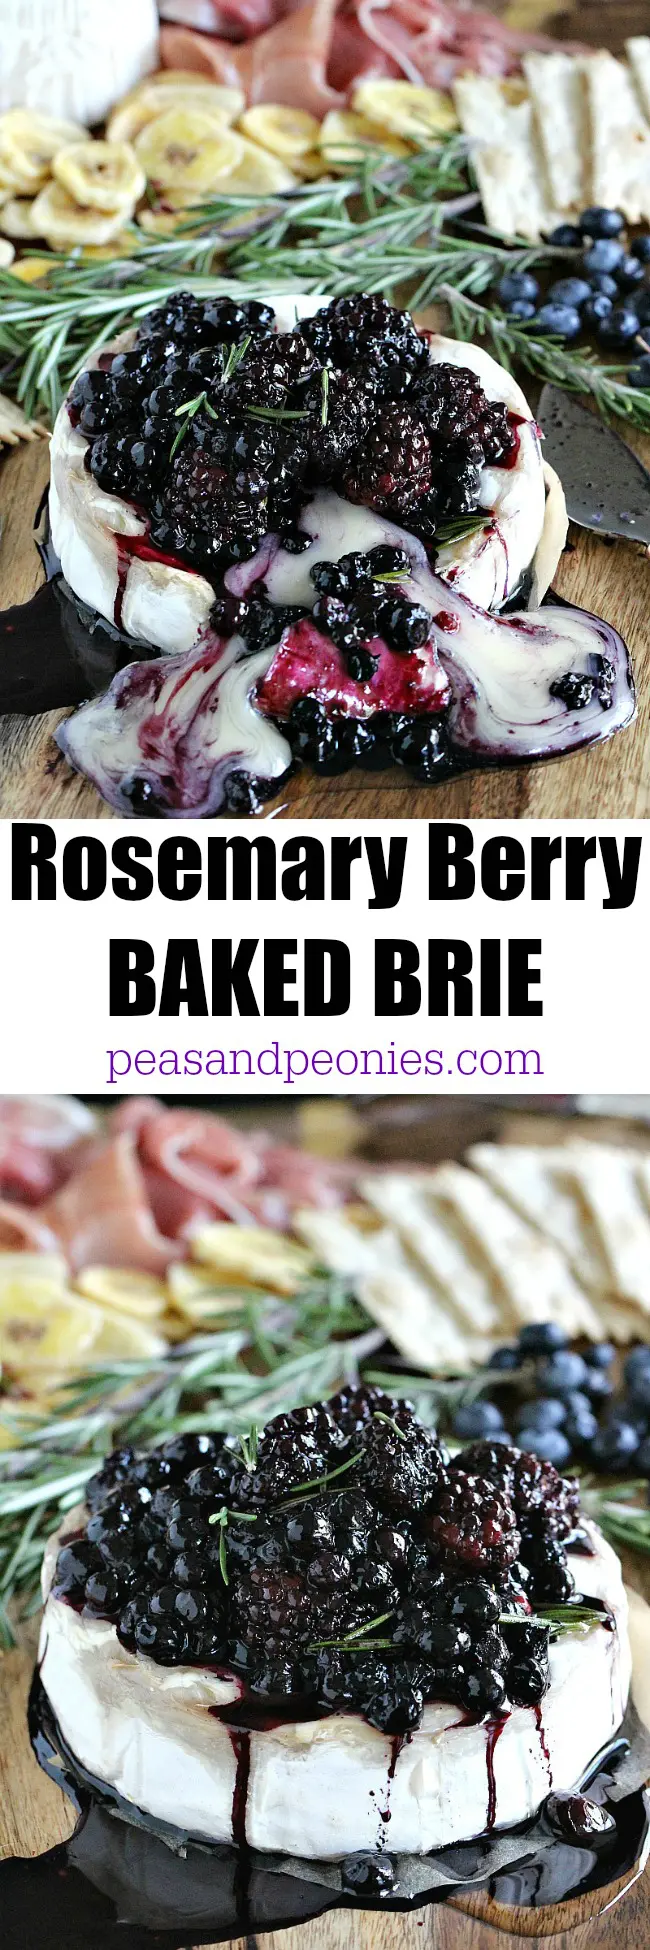 Rosemary Berry Baked Brie with roasted blueberries and blackberries.